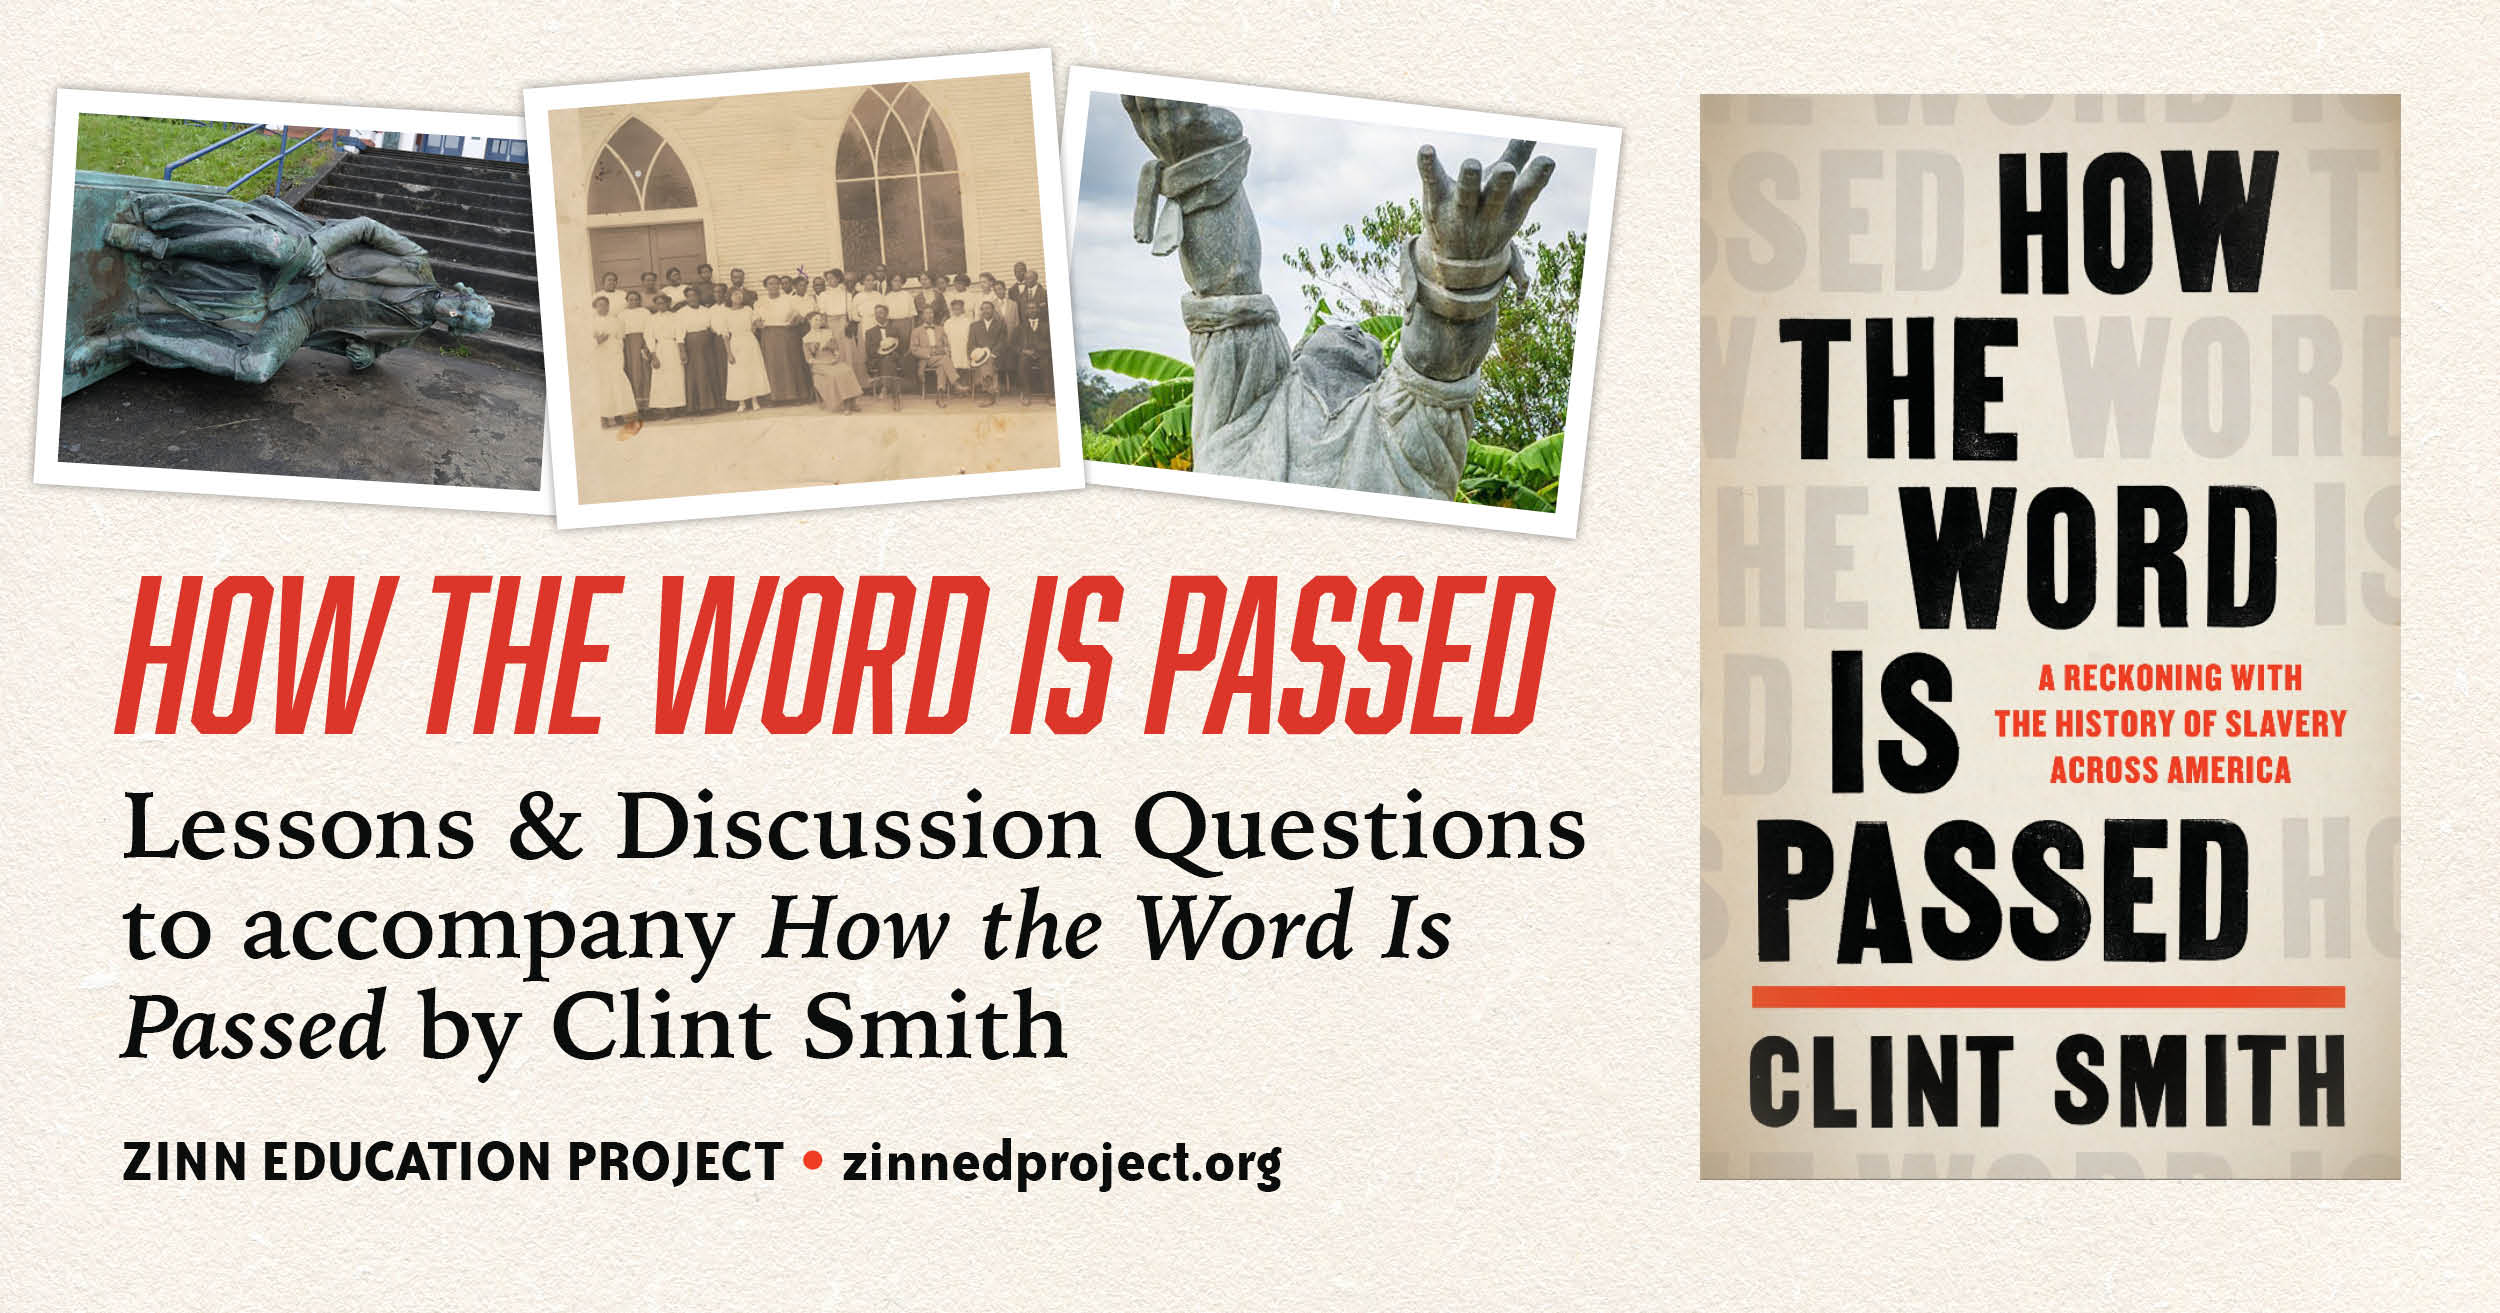 How the Word Is Passed by Clint Smith